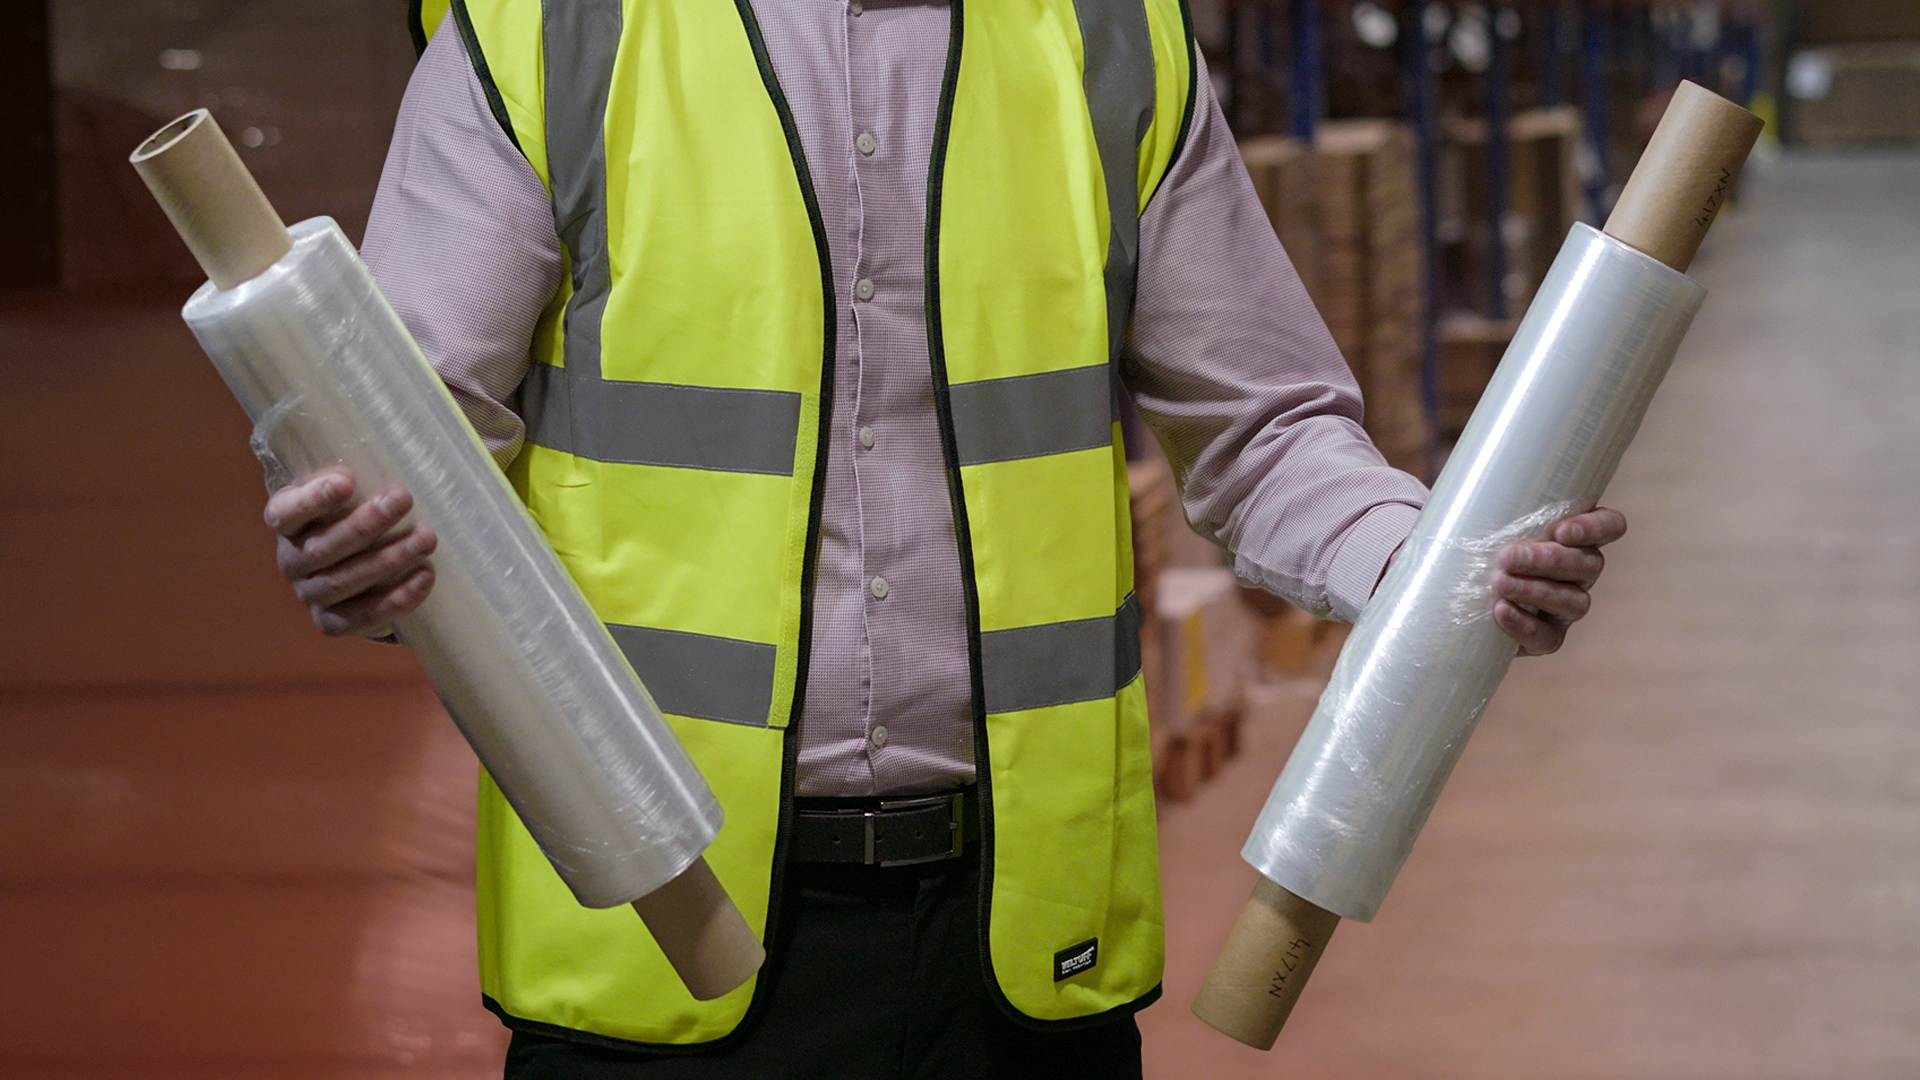 Man wearing high visibility vest holds a roll of pre stretched film in one hand and a roll of standard in the other.